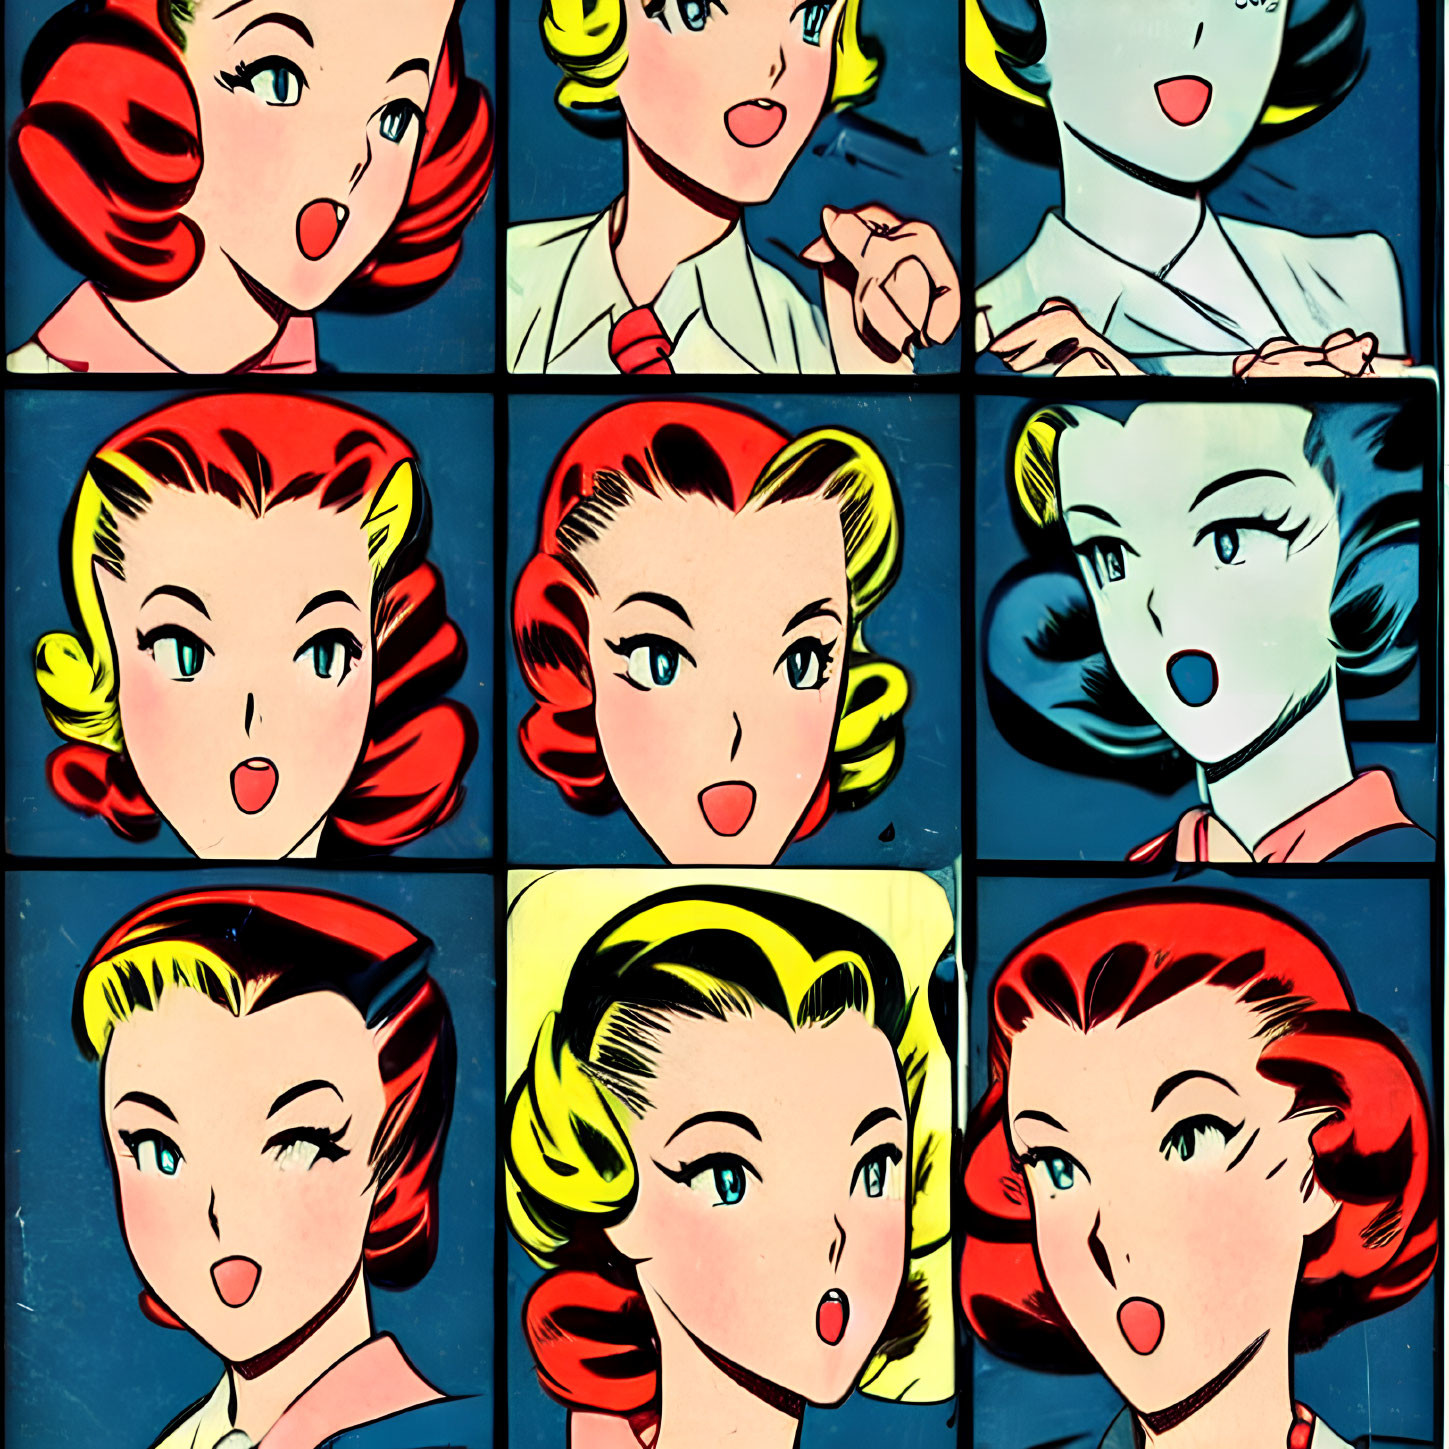 Colorful Pop Art Style Collage of Woman's Emotions in Nine Panels